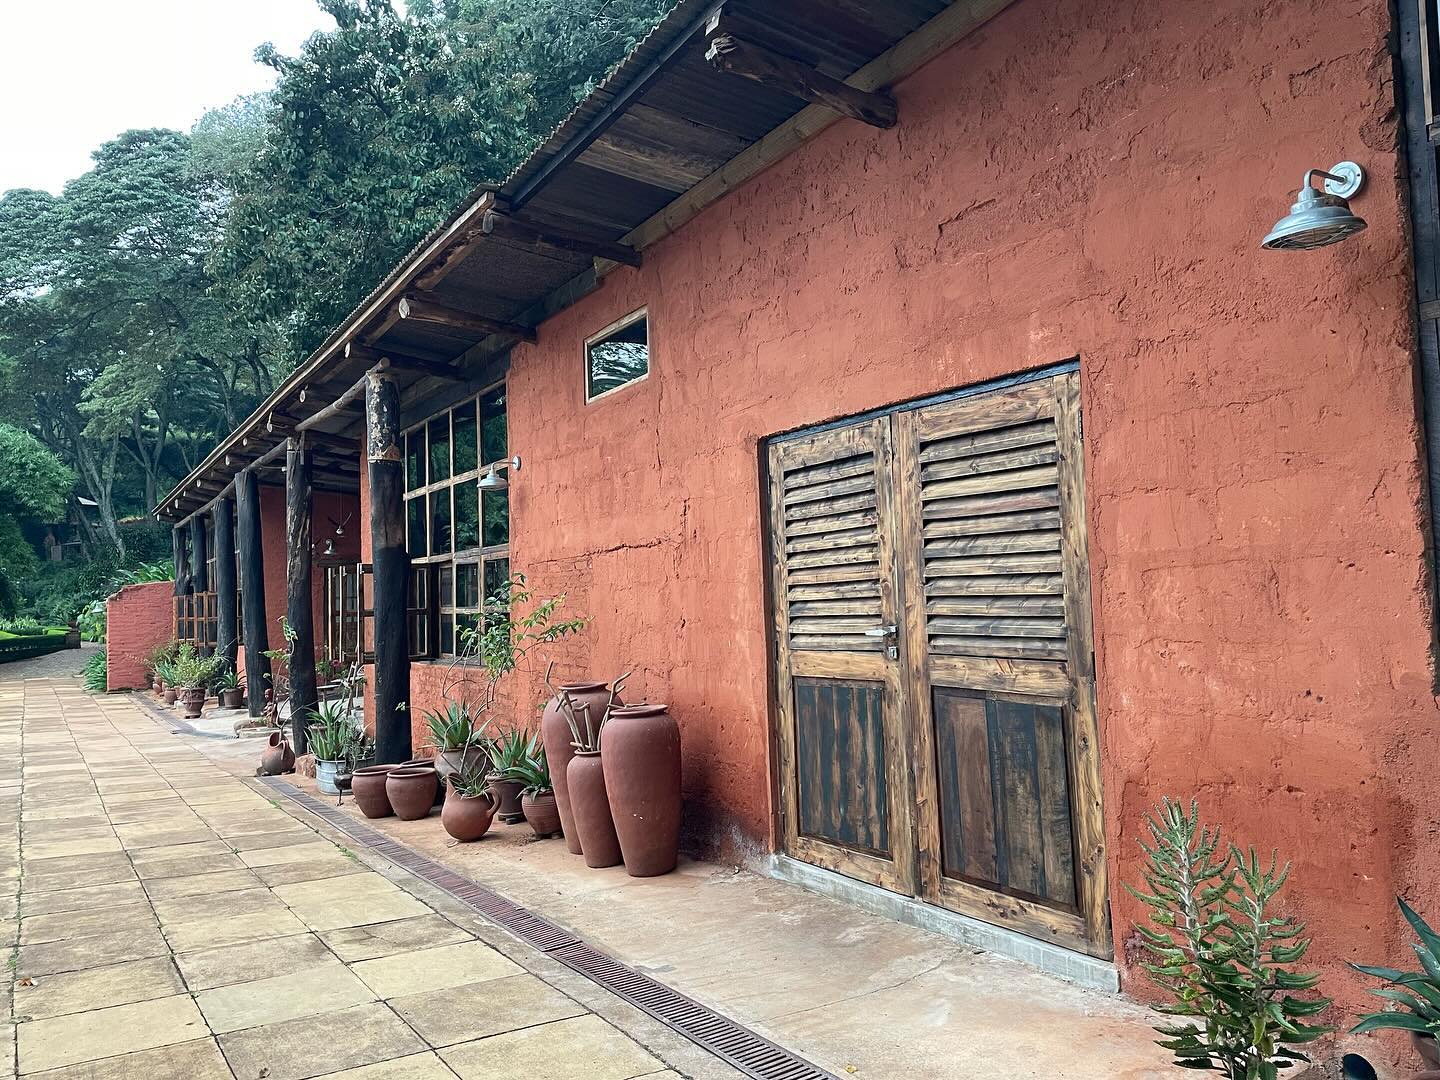 The old stables have been transformed. The authentic look has been retained. Recycled timber and up cycled doors and fittings finish the look. Space has been created for artist studio, the gym, meeting rooms and boutique. #refurb #upcycle #recycle #repurpose #interior #decor #design #meeting #meetingroom #space